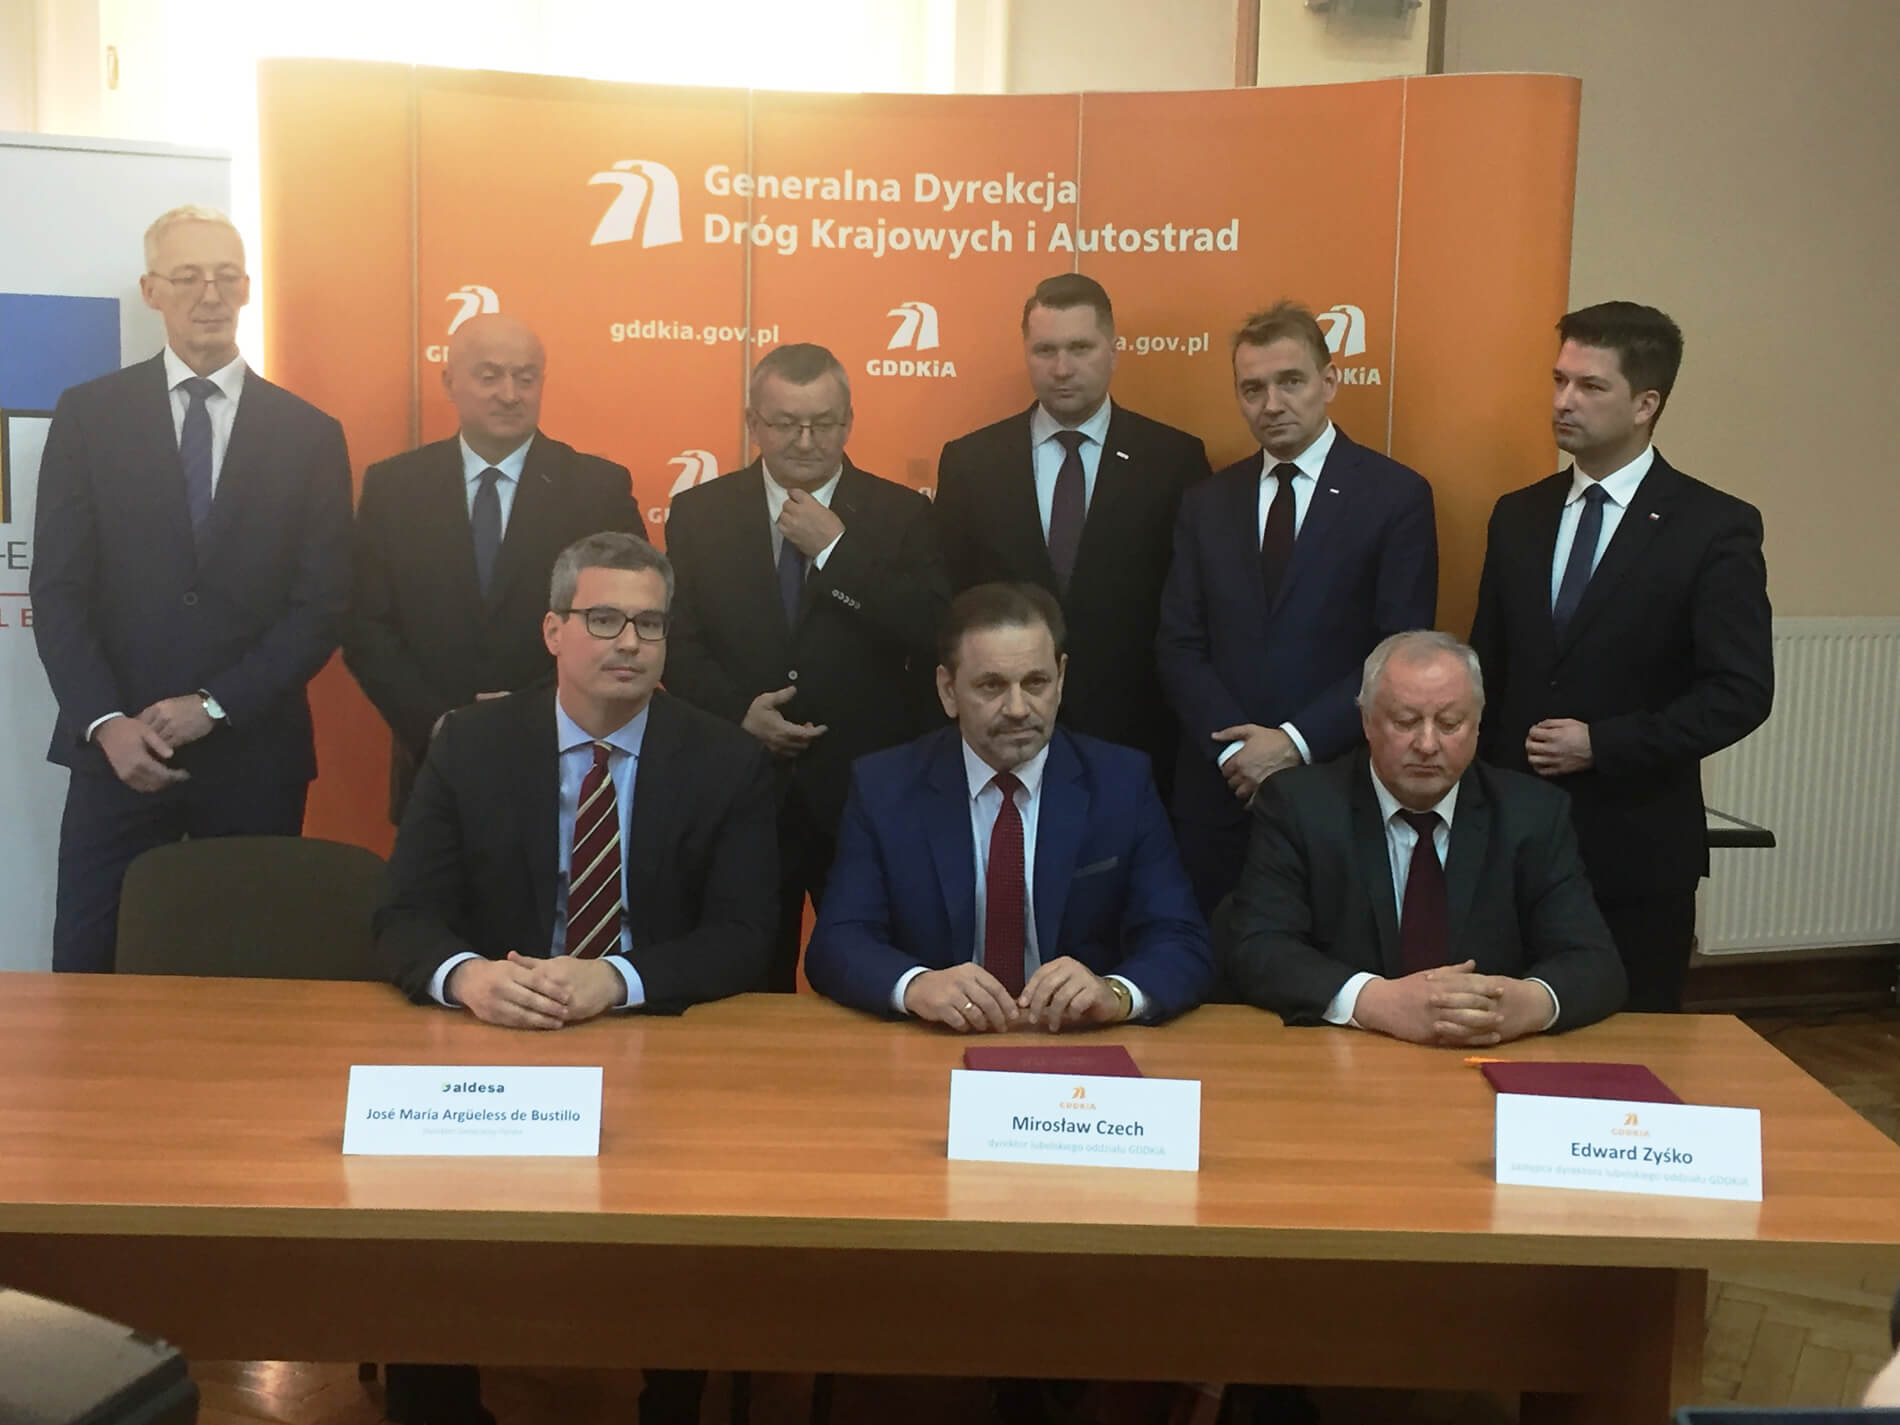 Aldesa - Aldesa Polska will build two extreme sections of the S19 road